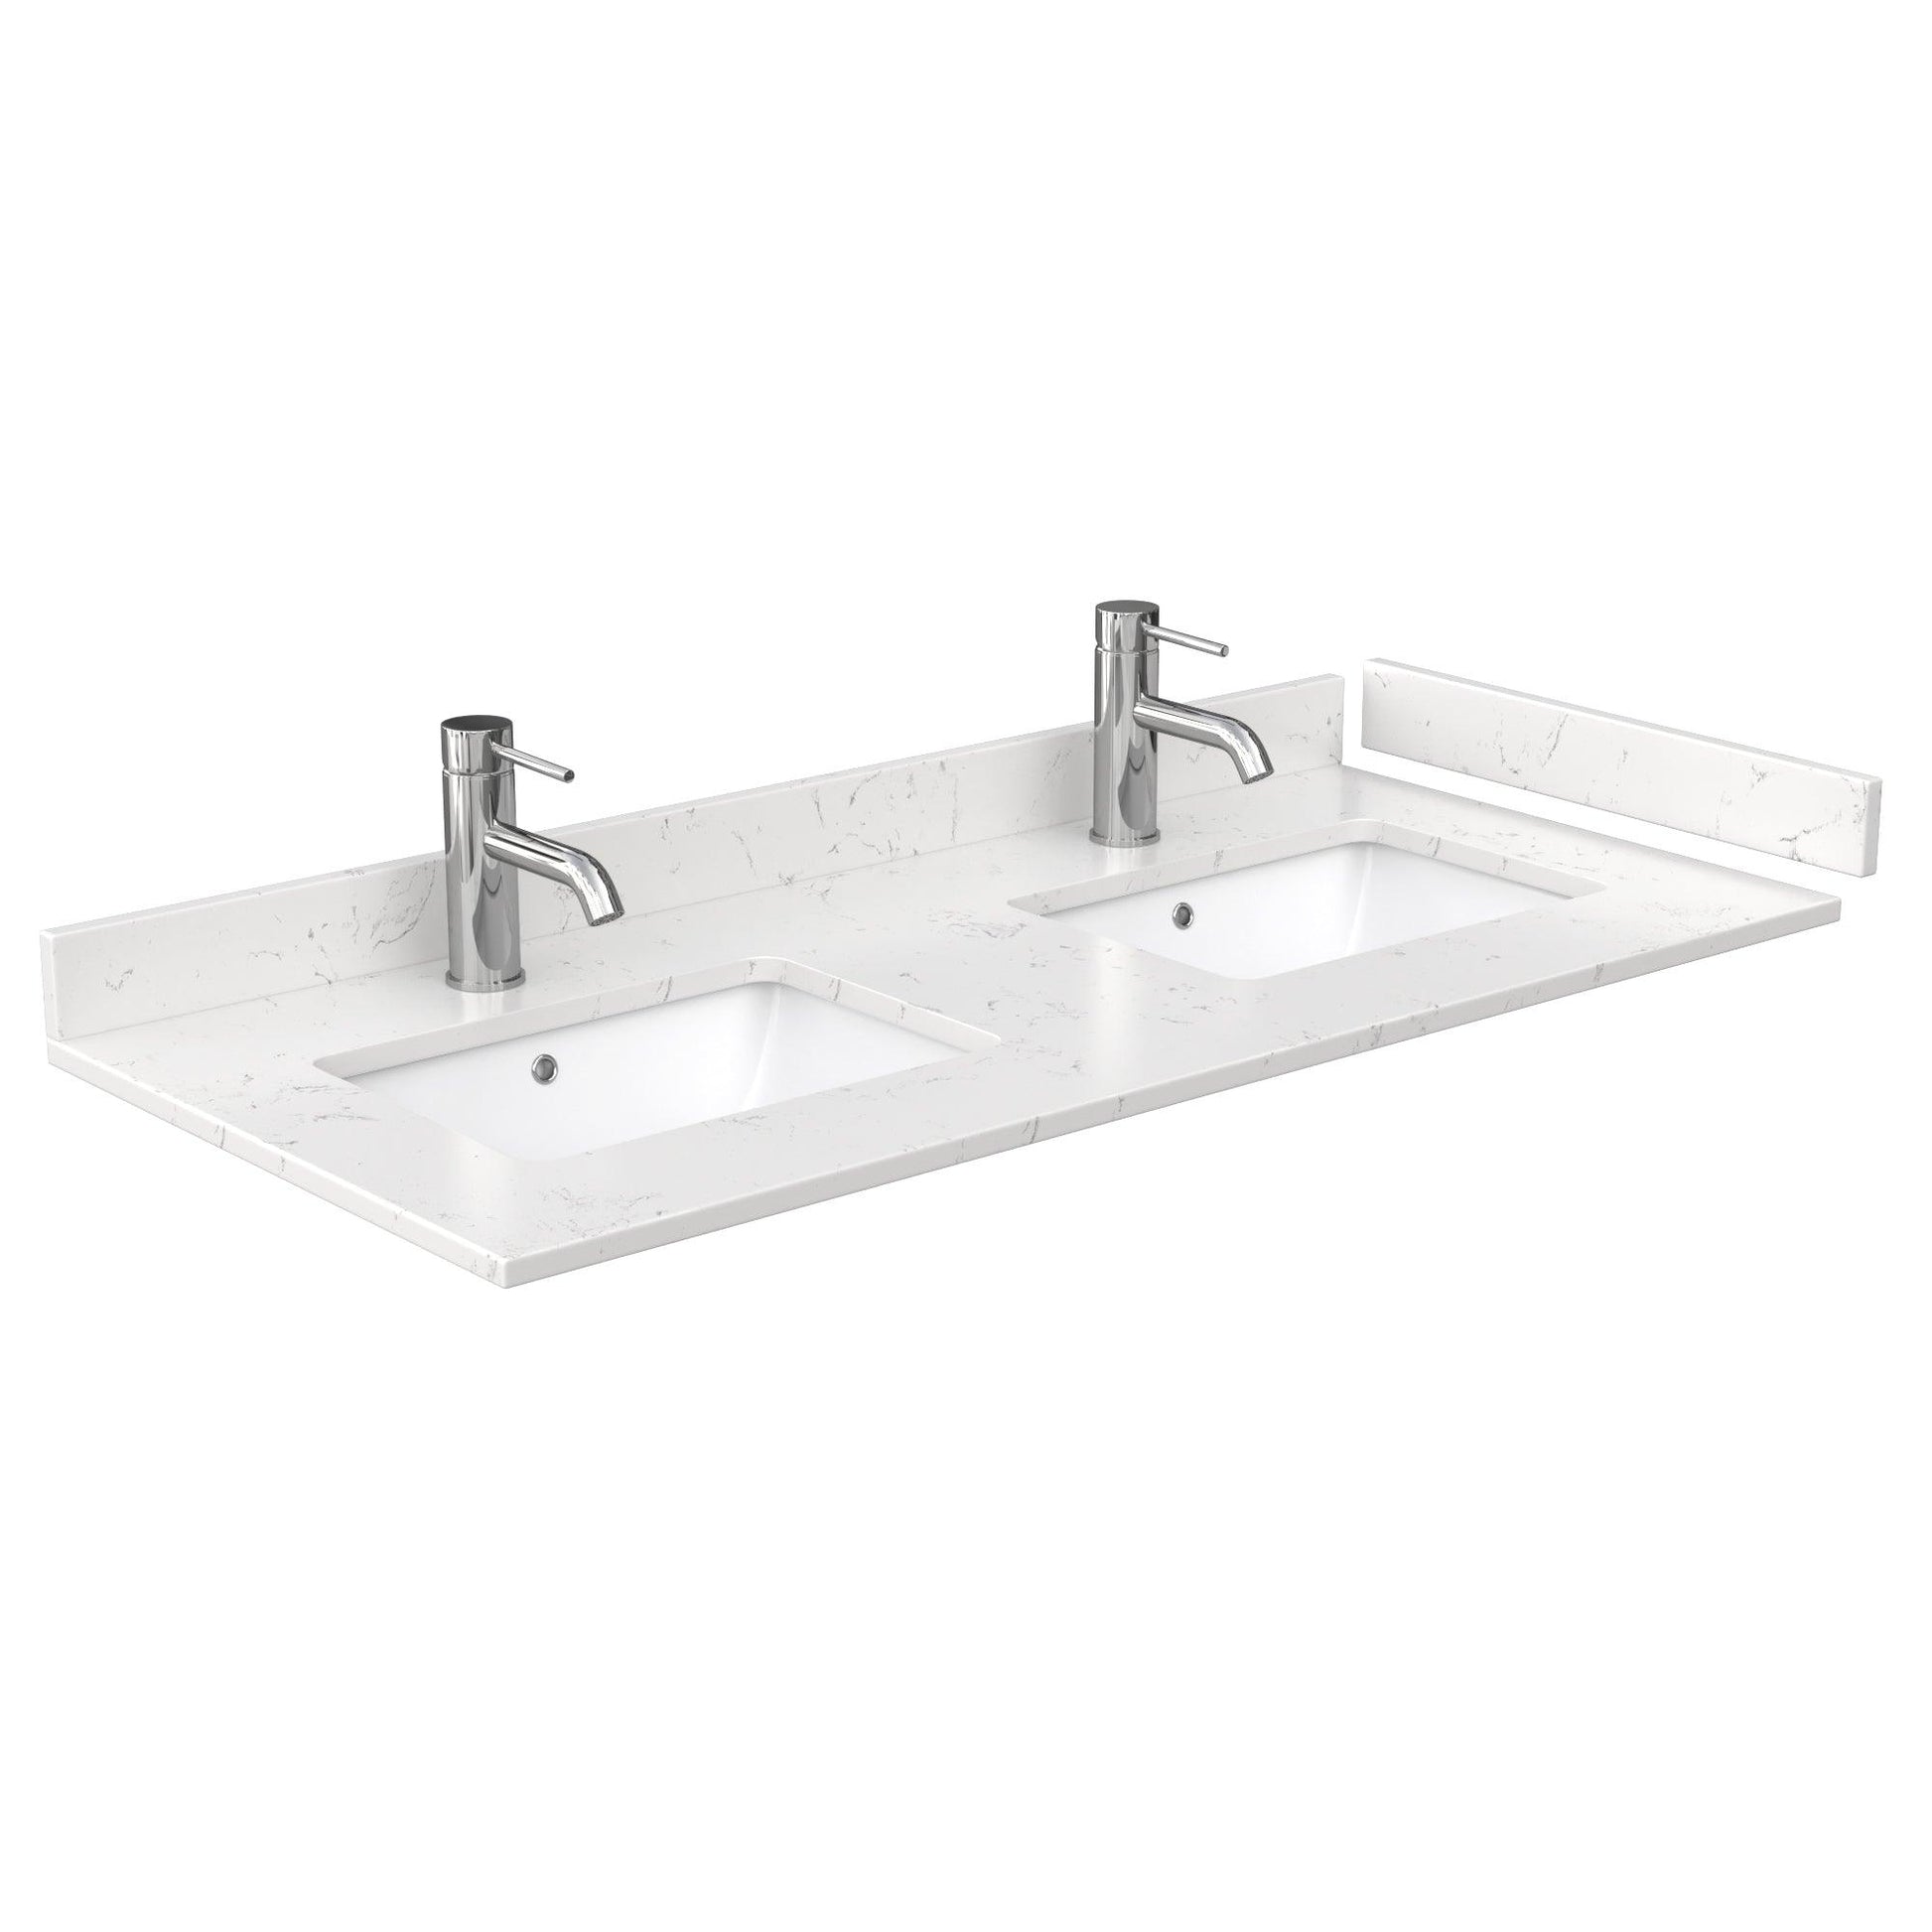 
  
  Wyndham Collection Avery Double Bathroom Vanity with Light-Vein Carrara Cultured Marble Countertop, Undermount Square Sinks, Optional Mirror
  
